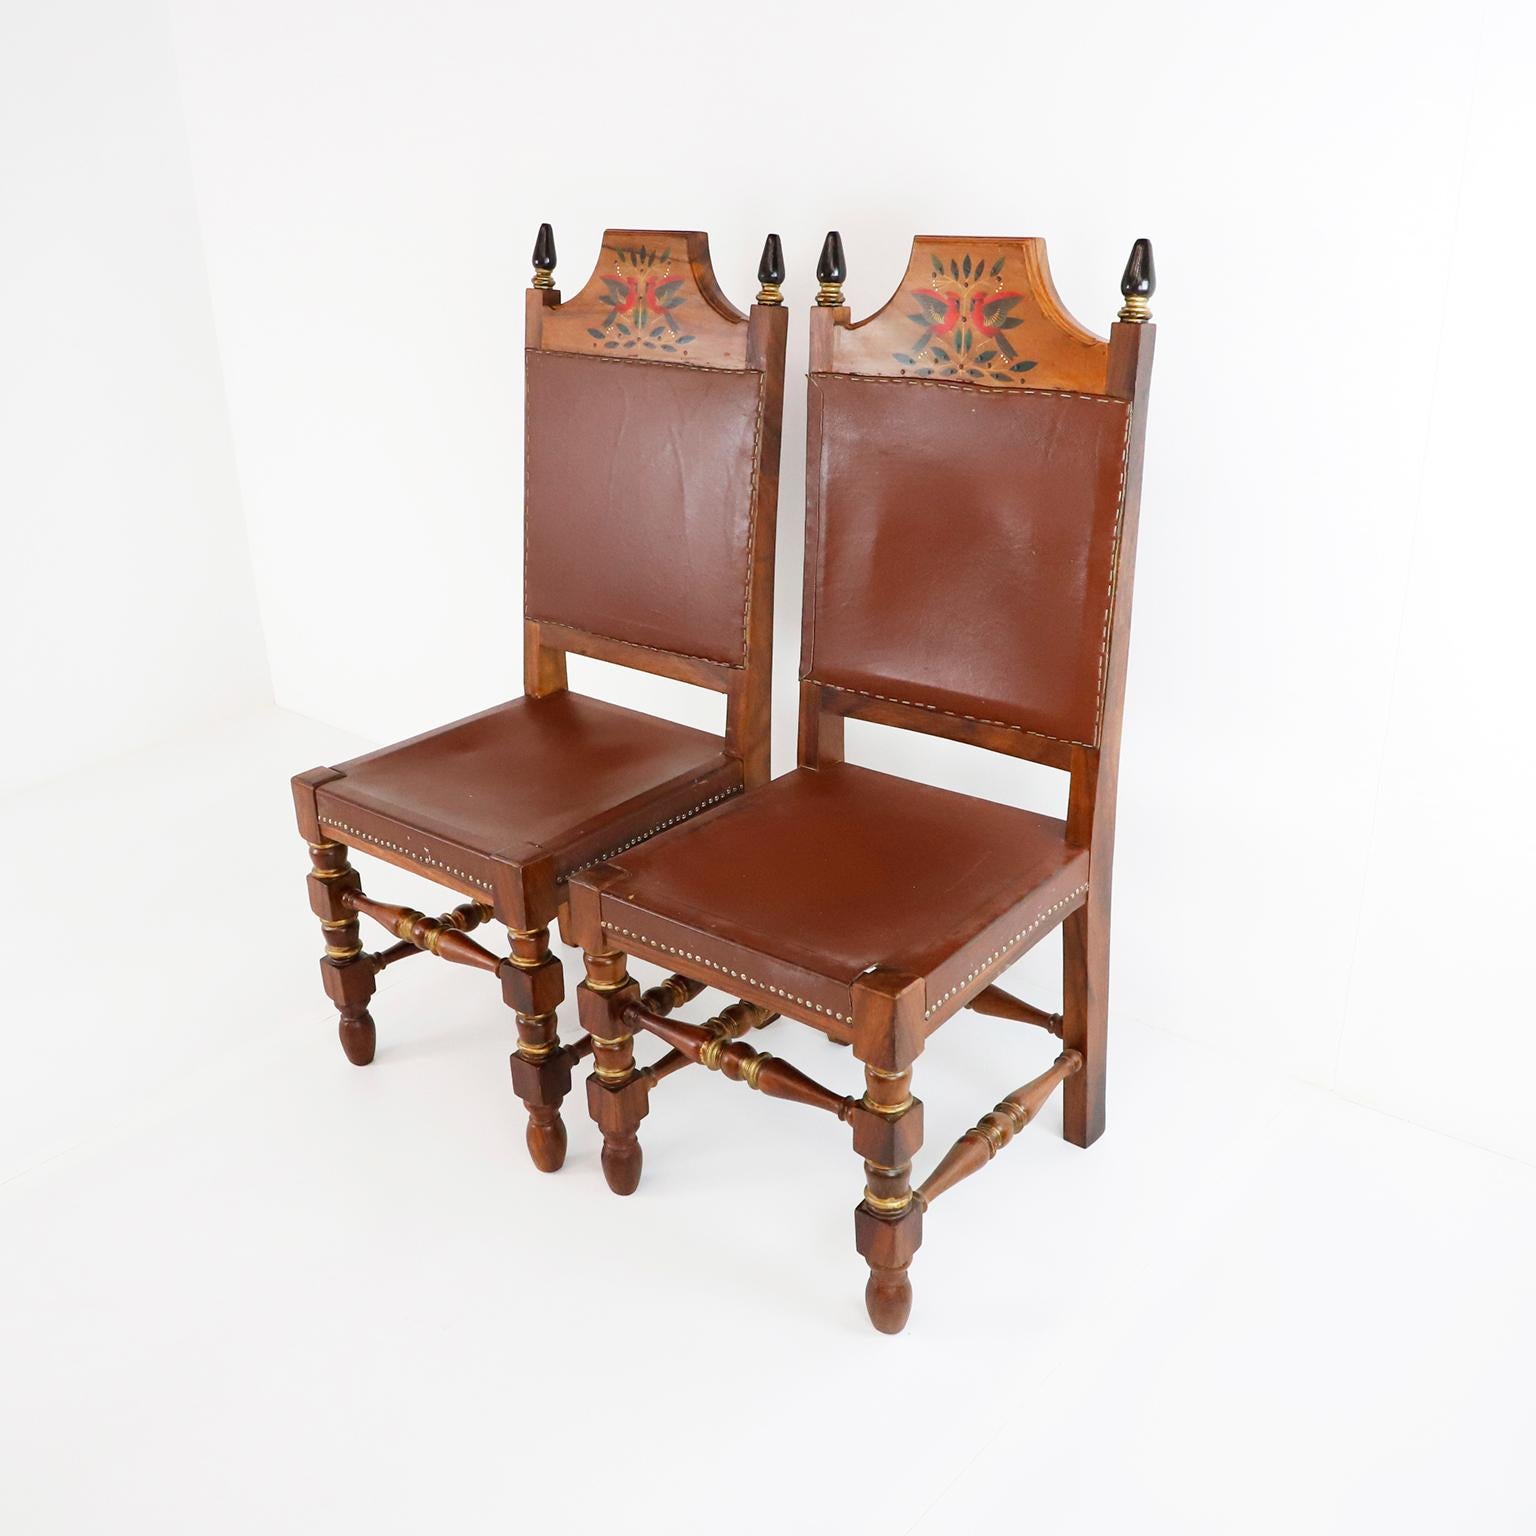 Circa 1960, We offer this fantastic Set of Four Mexican Chairs designed and hand painted by Alejandro Rangel Hidalgo, made in solid parota wood.

Alejandro Rangel Hidalgo (1923-2000) was a Mexican artist, graphic designer and artisan best known